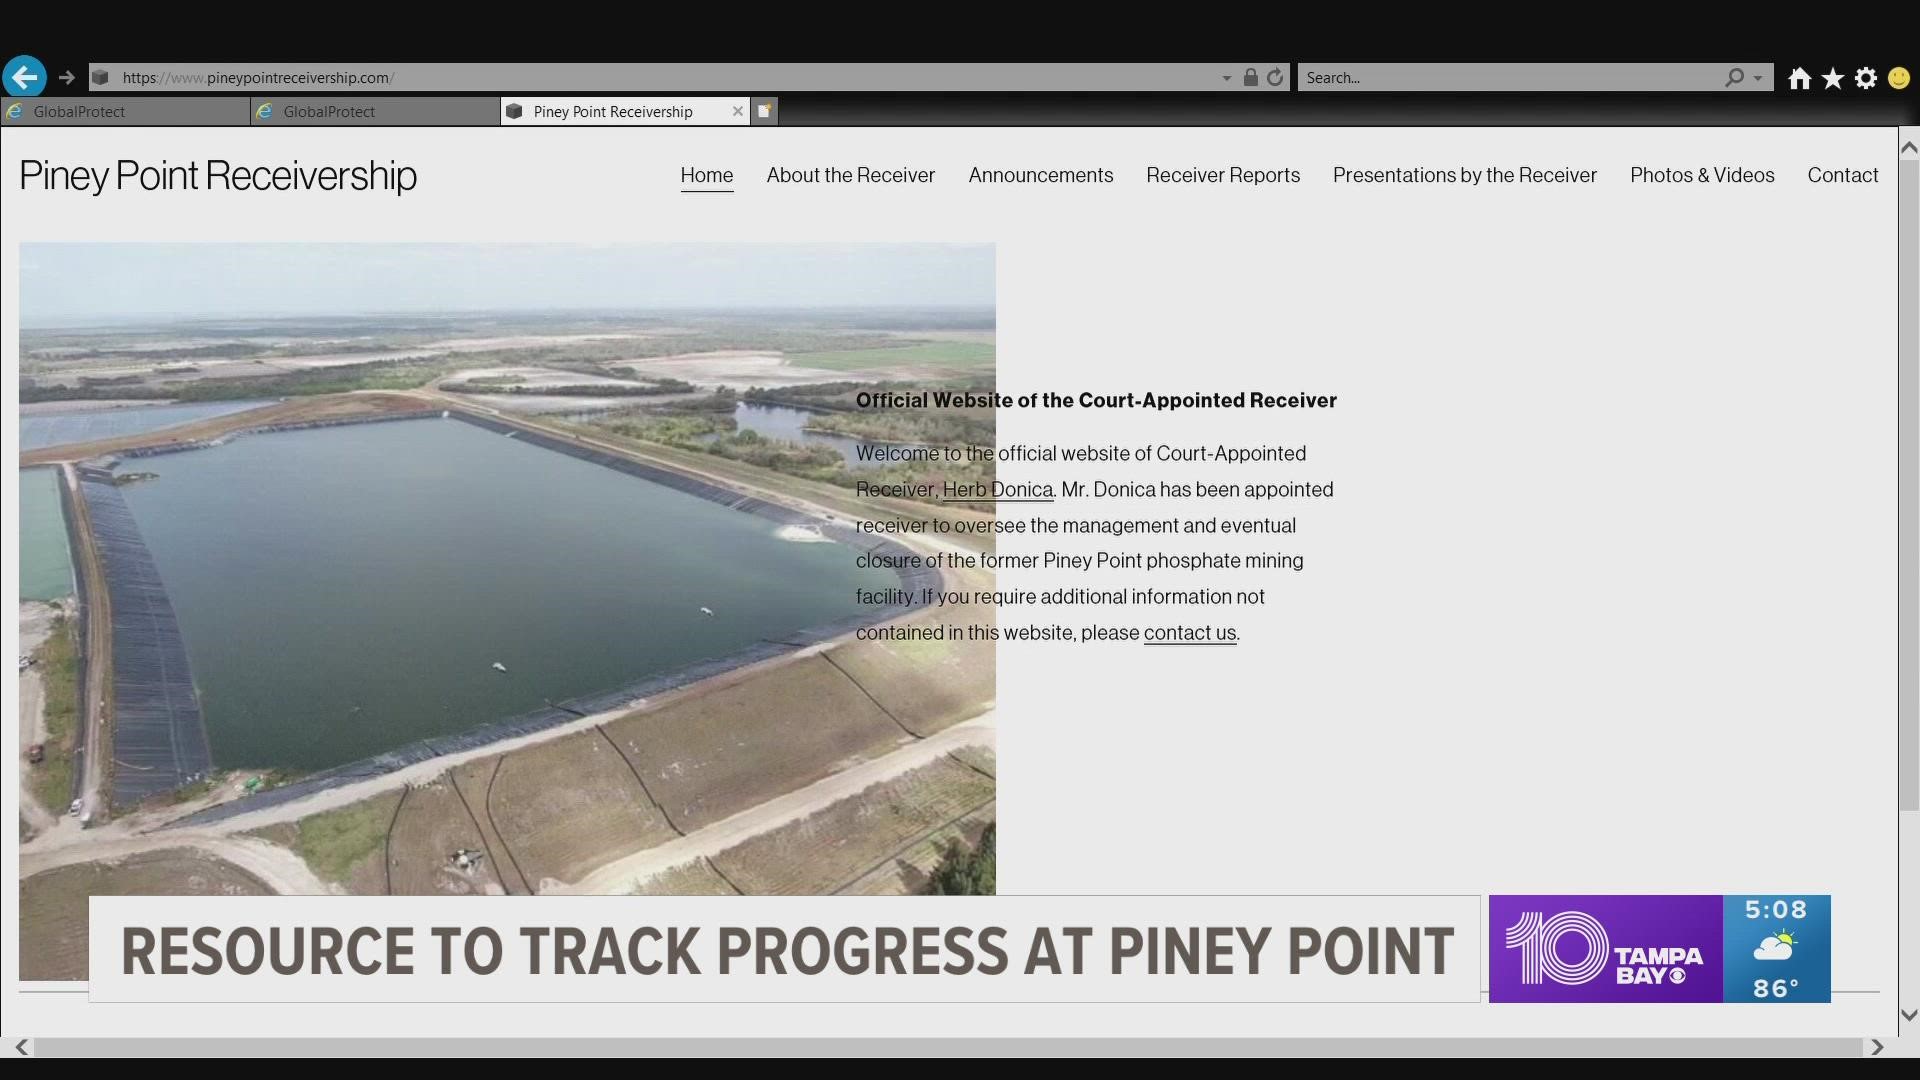 A new website dedicated to tracking the progress at Piney Point is now available.